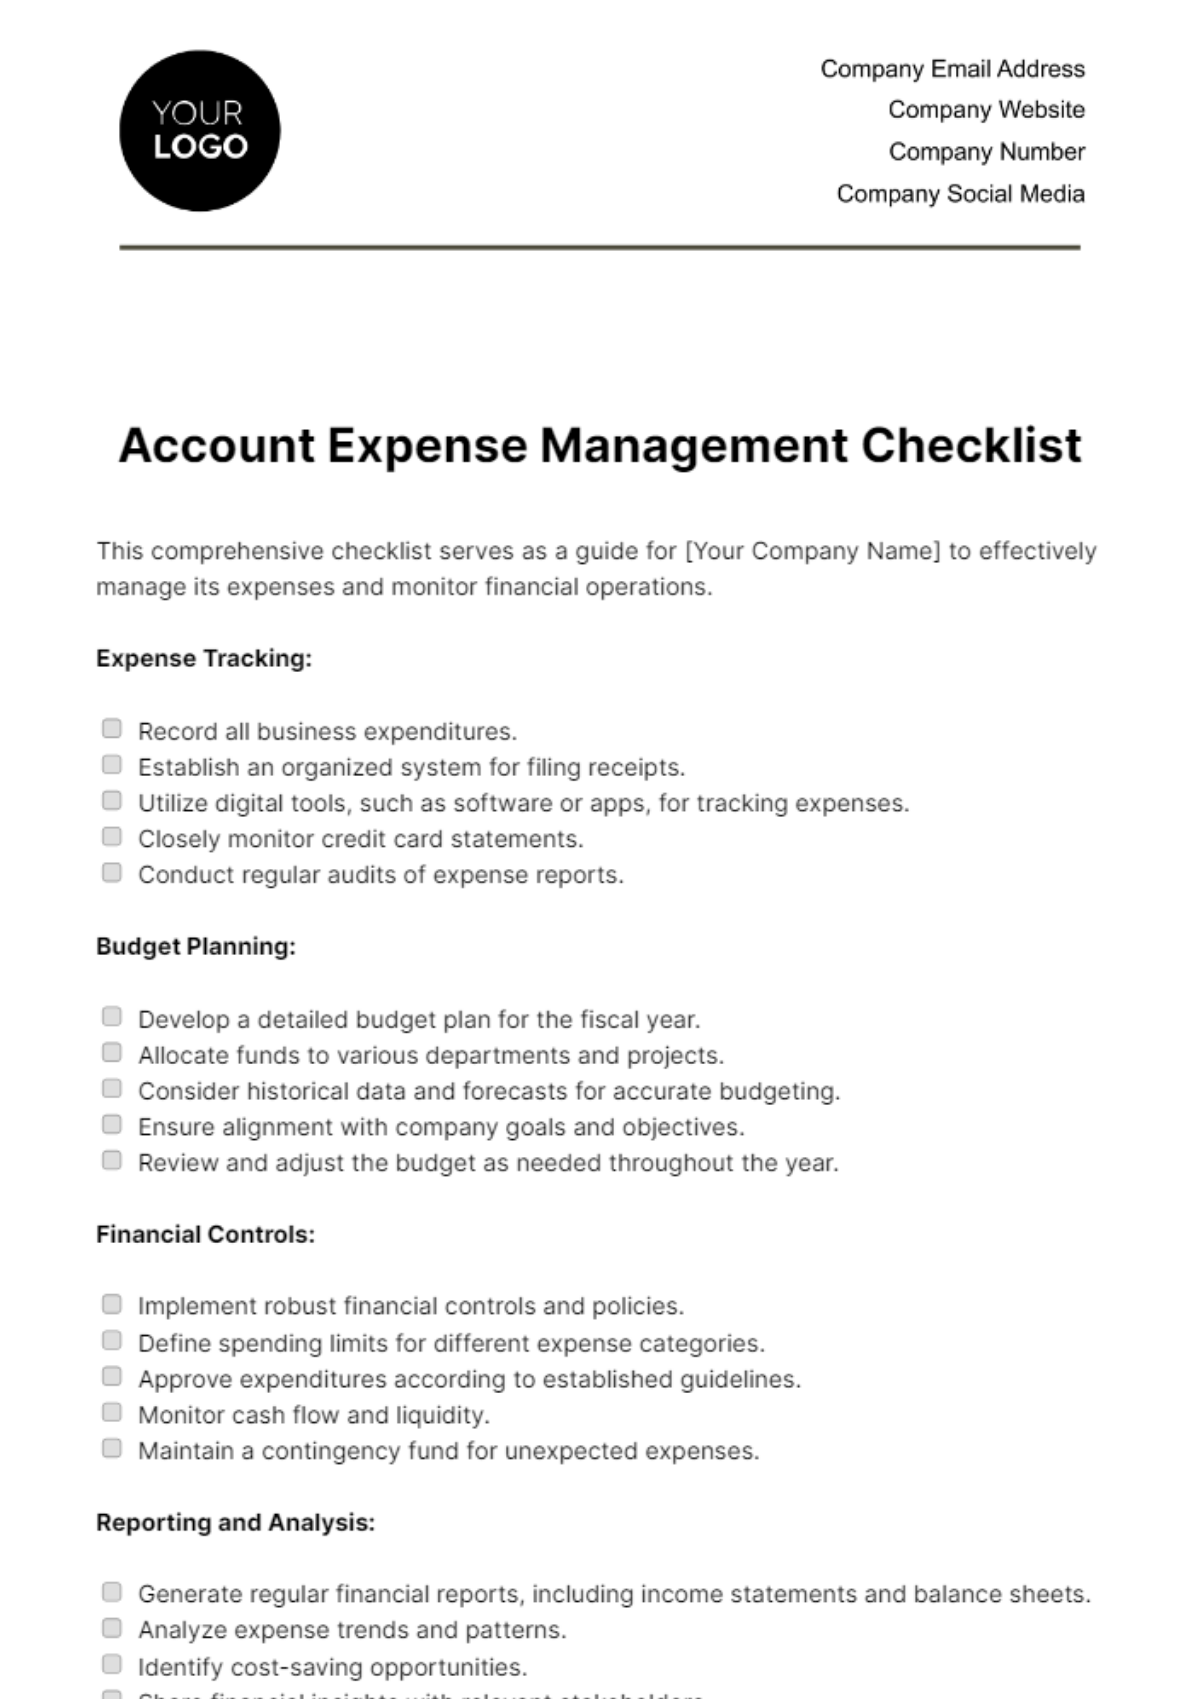 Free Account Expense Management Checklist Template